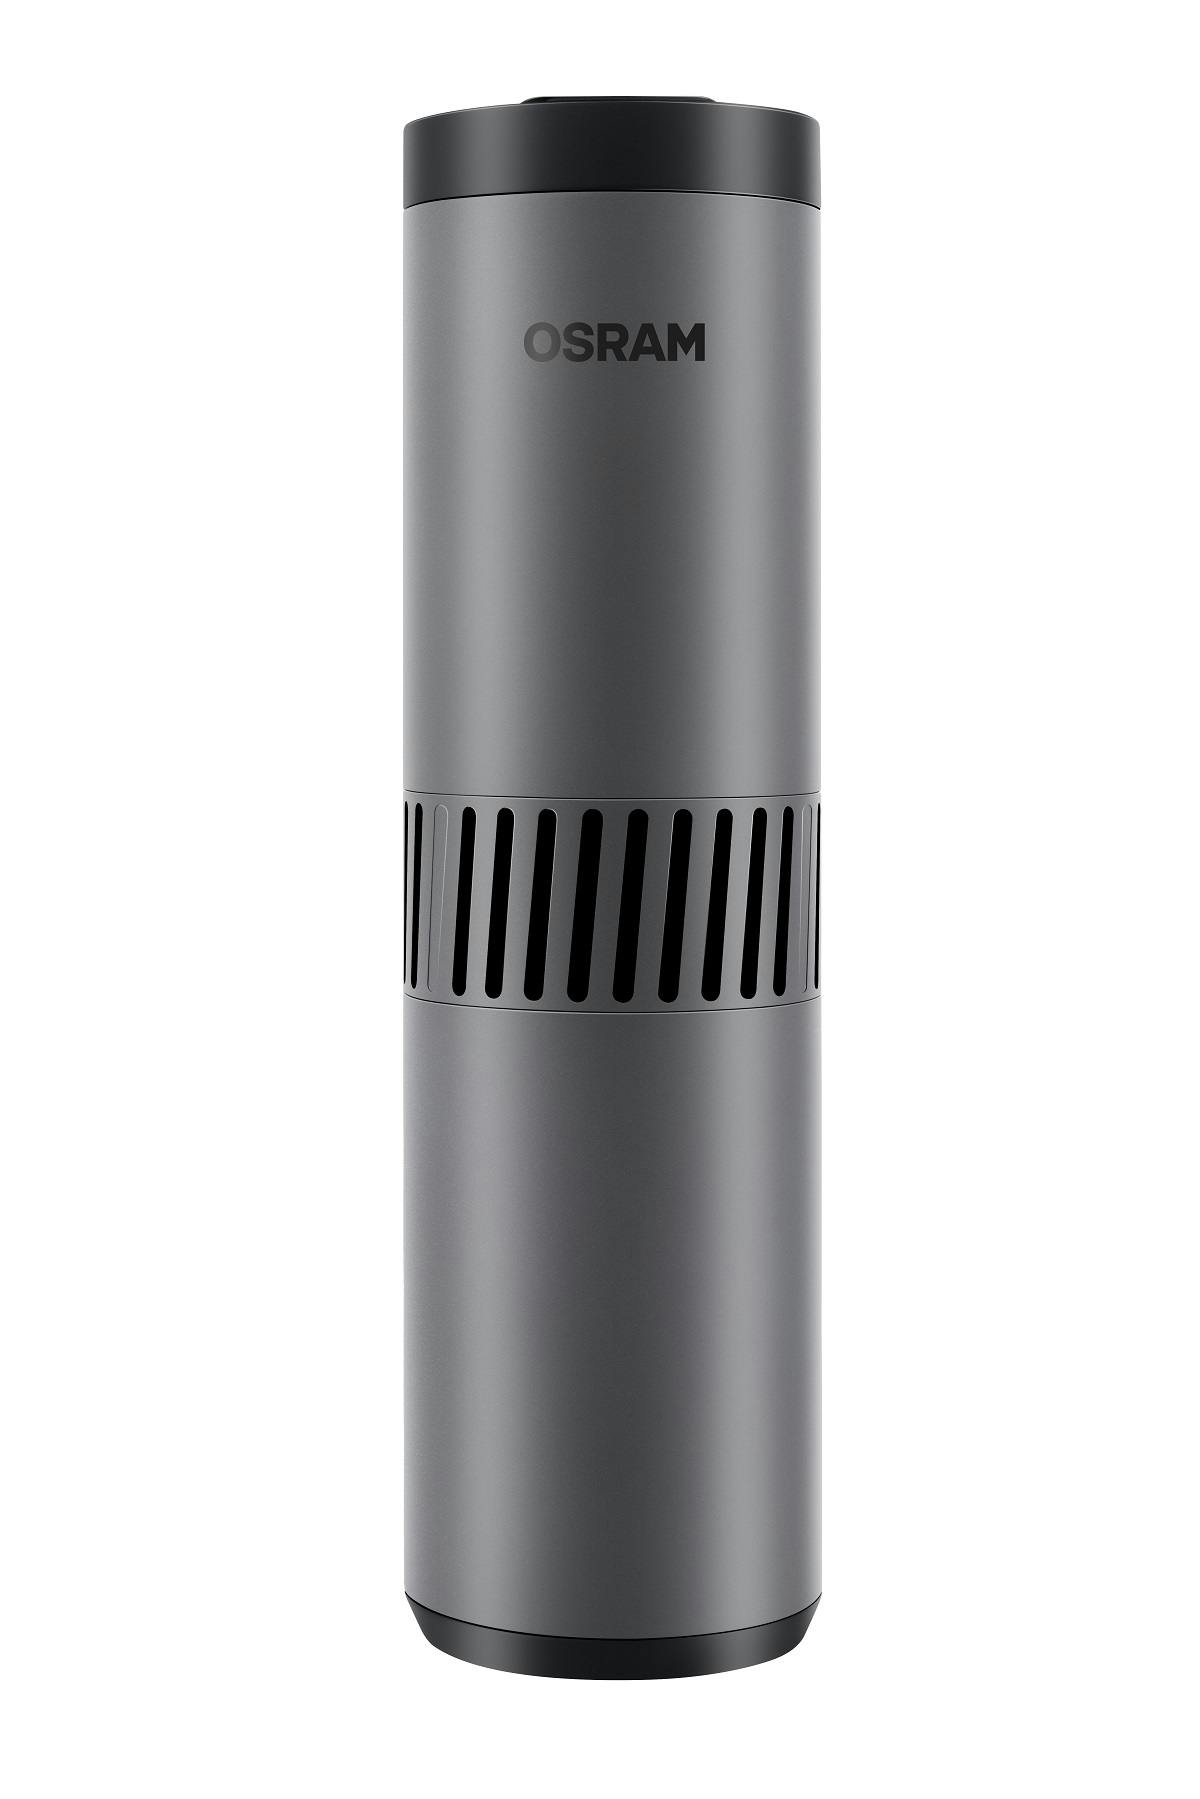 The standard AirZing UV-C model has no HEPA filter. (Photo credit: Image courtesy of Osram.)